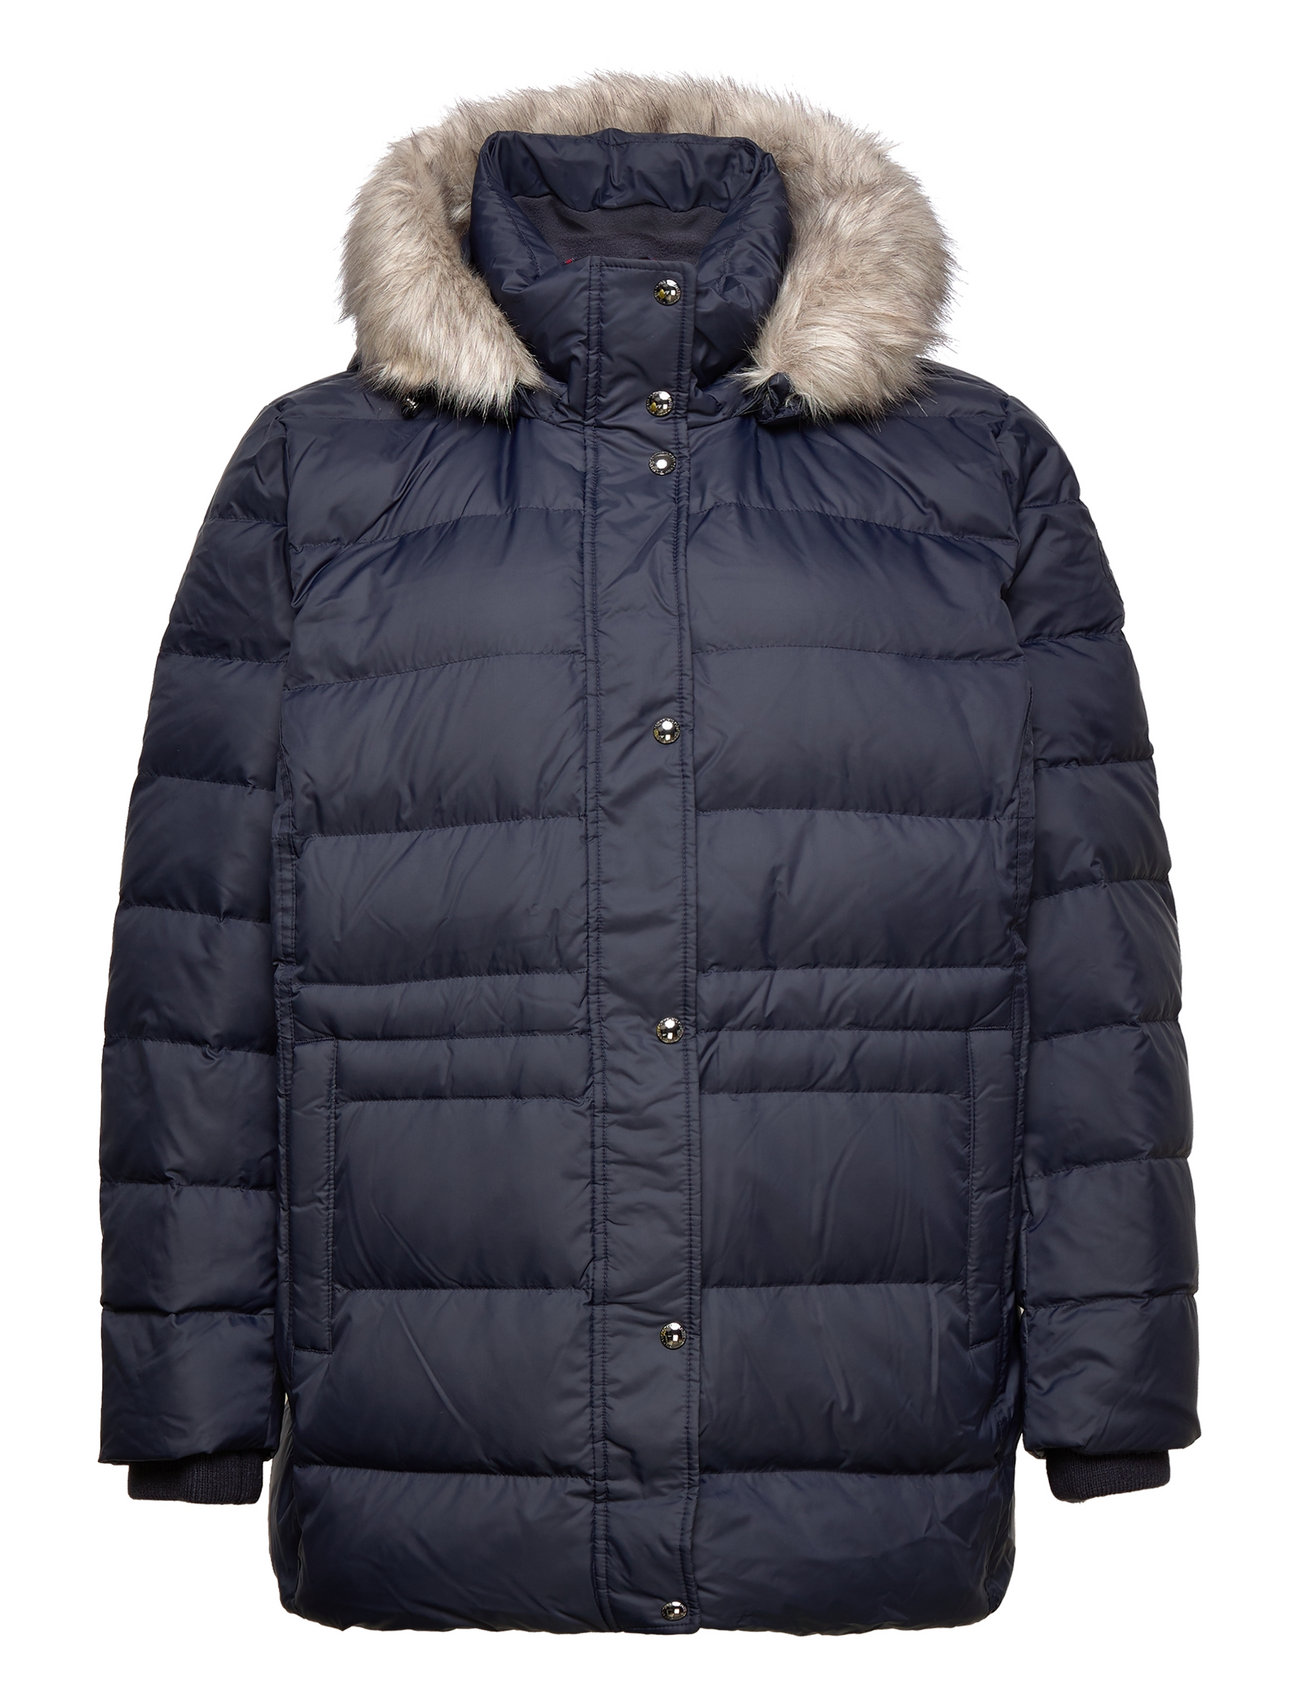 Hilfiger Th delivery - at and €. Tyra Tommy Jkt Boozt.com. returns Tommy Coats Down Fur Fast 329.90 Padded online Buy Ess easy Hilfiger from Crv